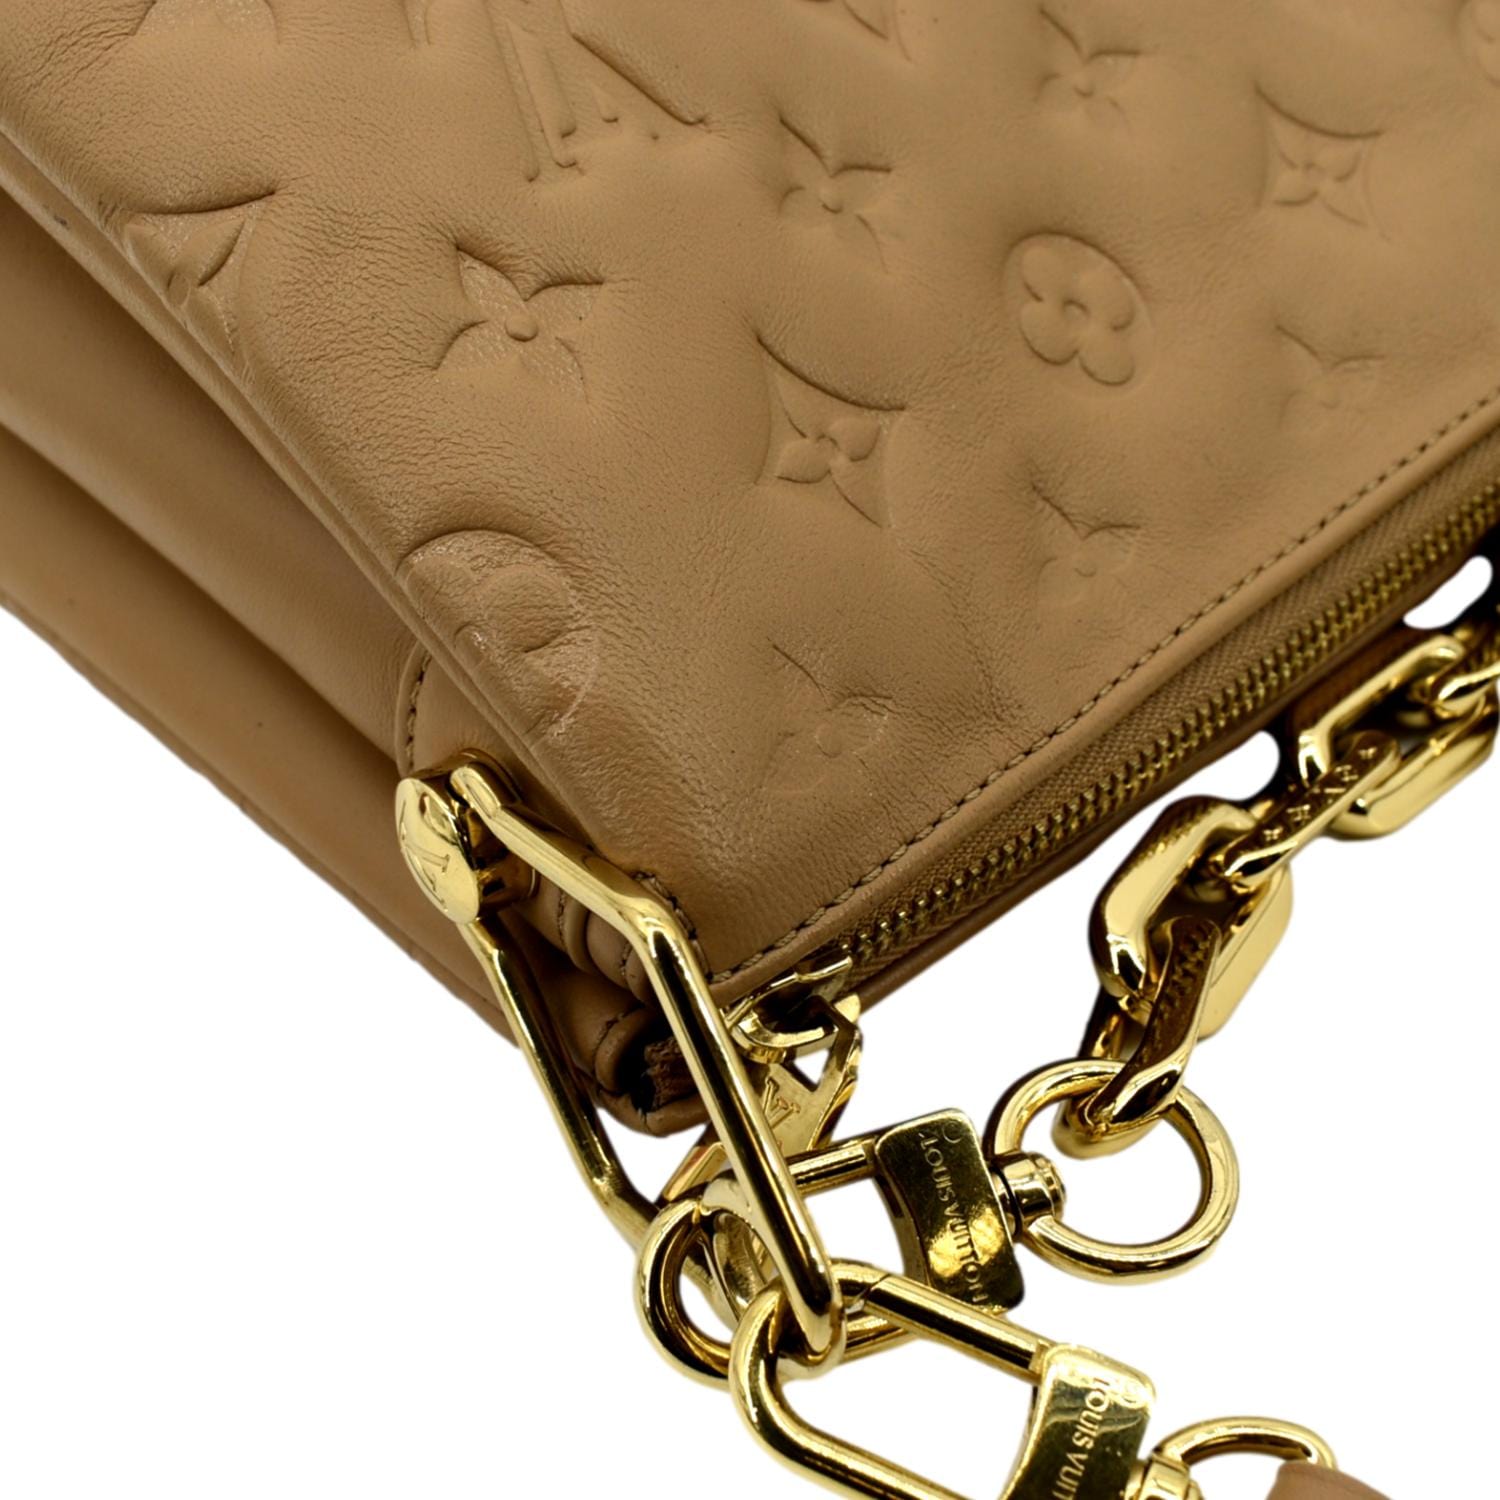 Louis Vuitton Taupe Monogram Embossed Puffy Lambskin Coussin PM, myGemma, CH